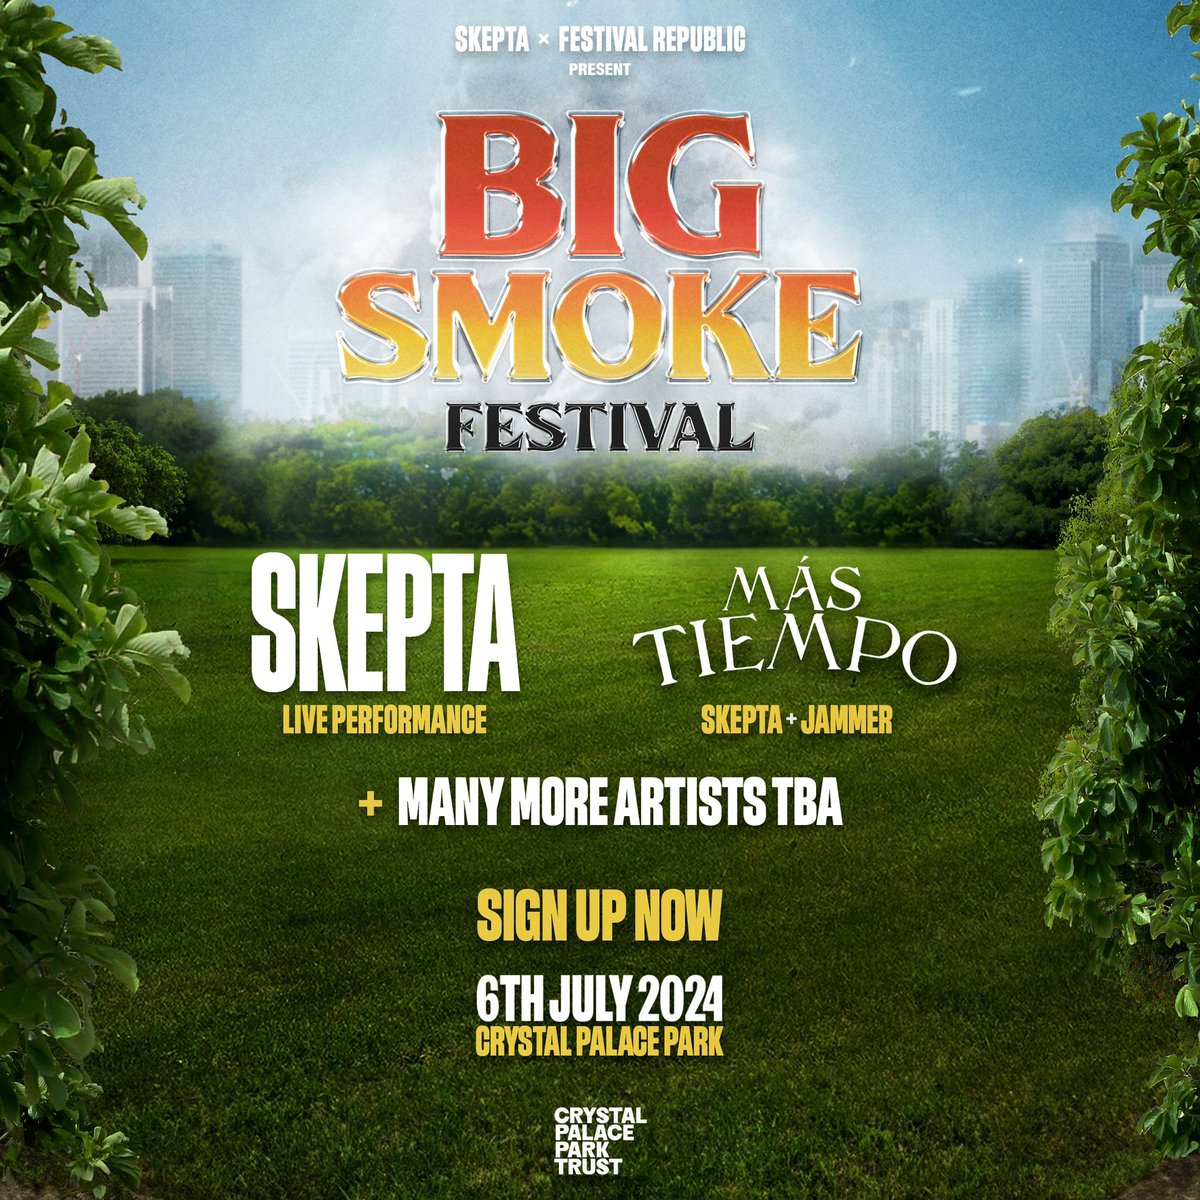 SIGN UP NOW Bigsmokefest.london